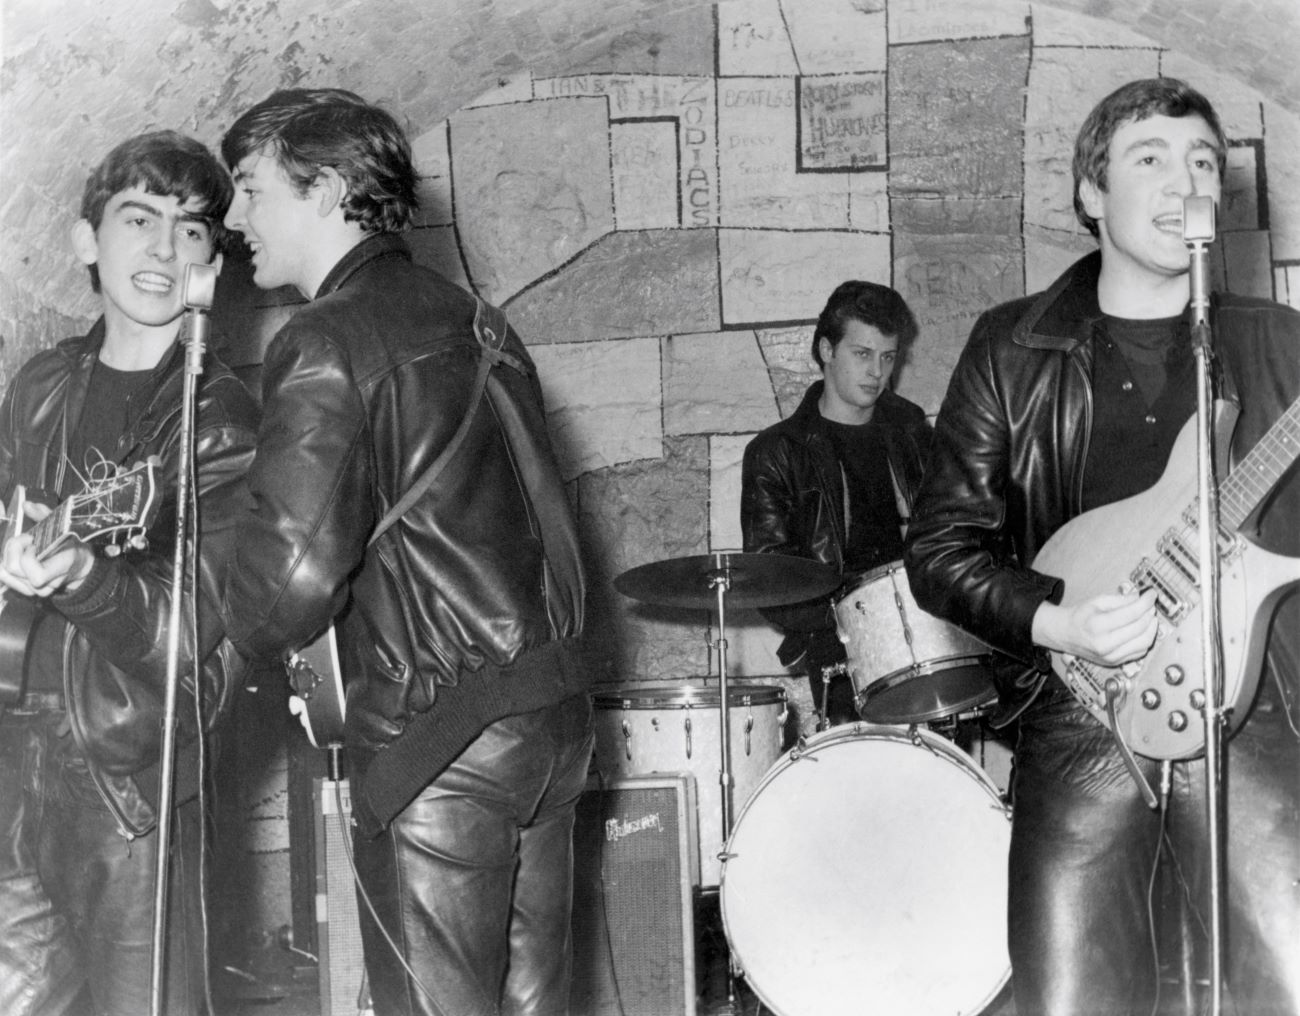 A black and white picture of George Harrison and Paul McCartney singing into the same microphone while playing guitars. John Lennon plays guitar and sings into his own microphone. Pete Best drums behind them.